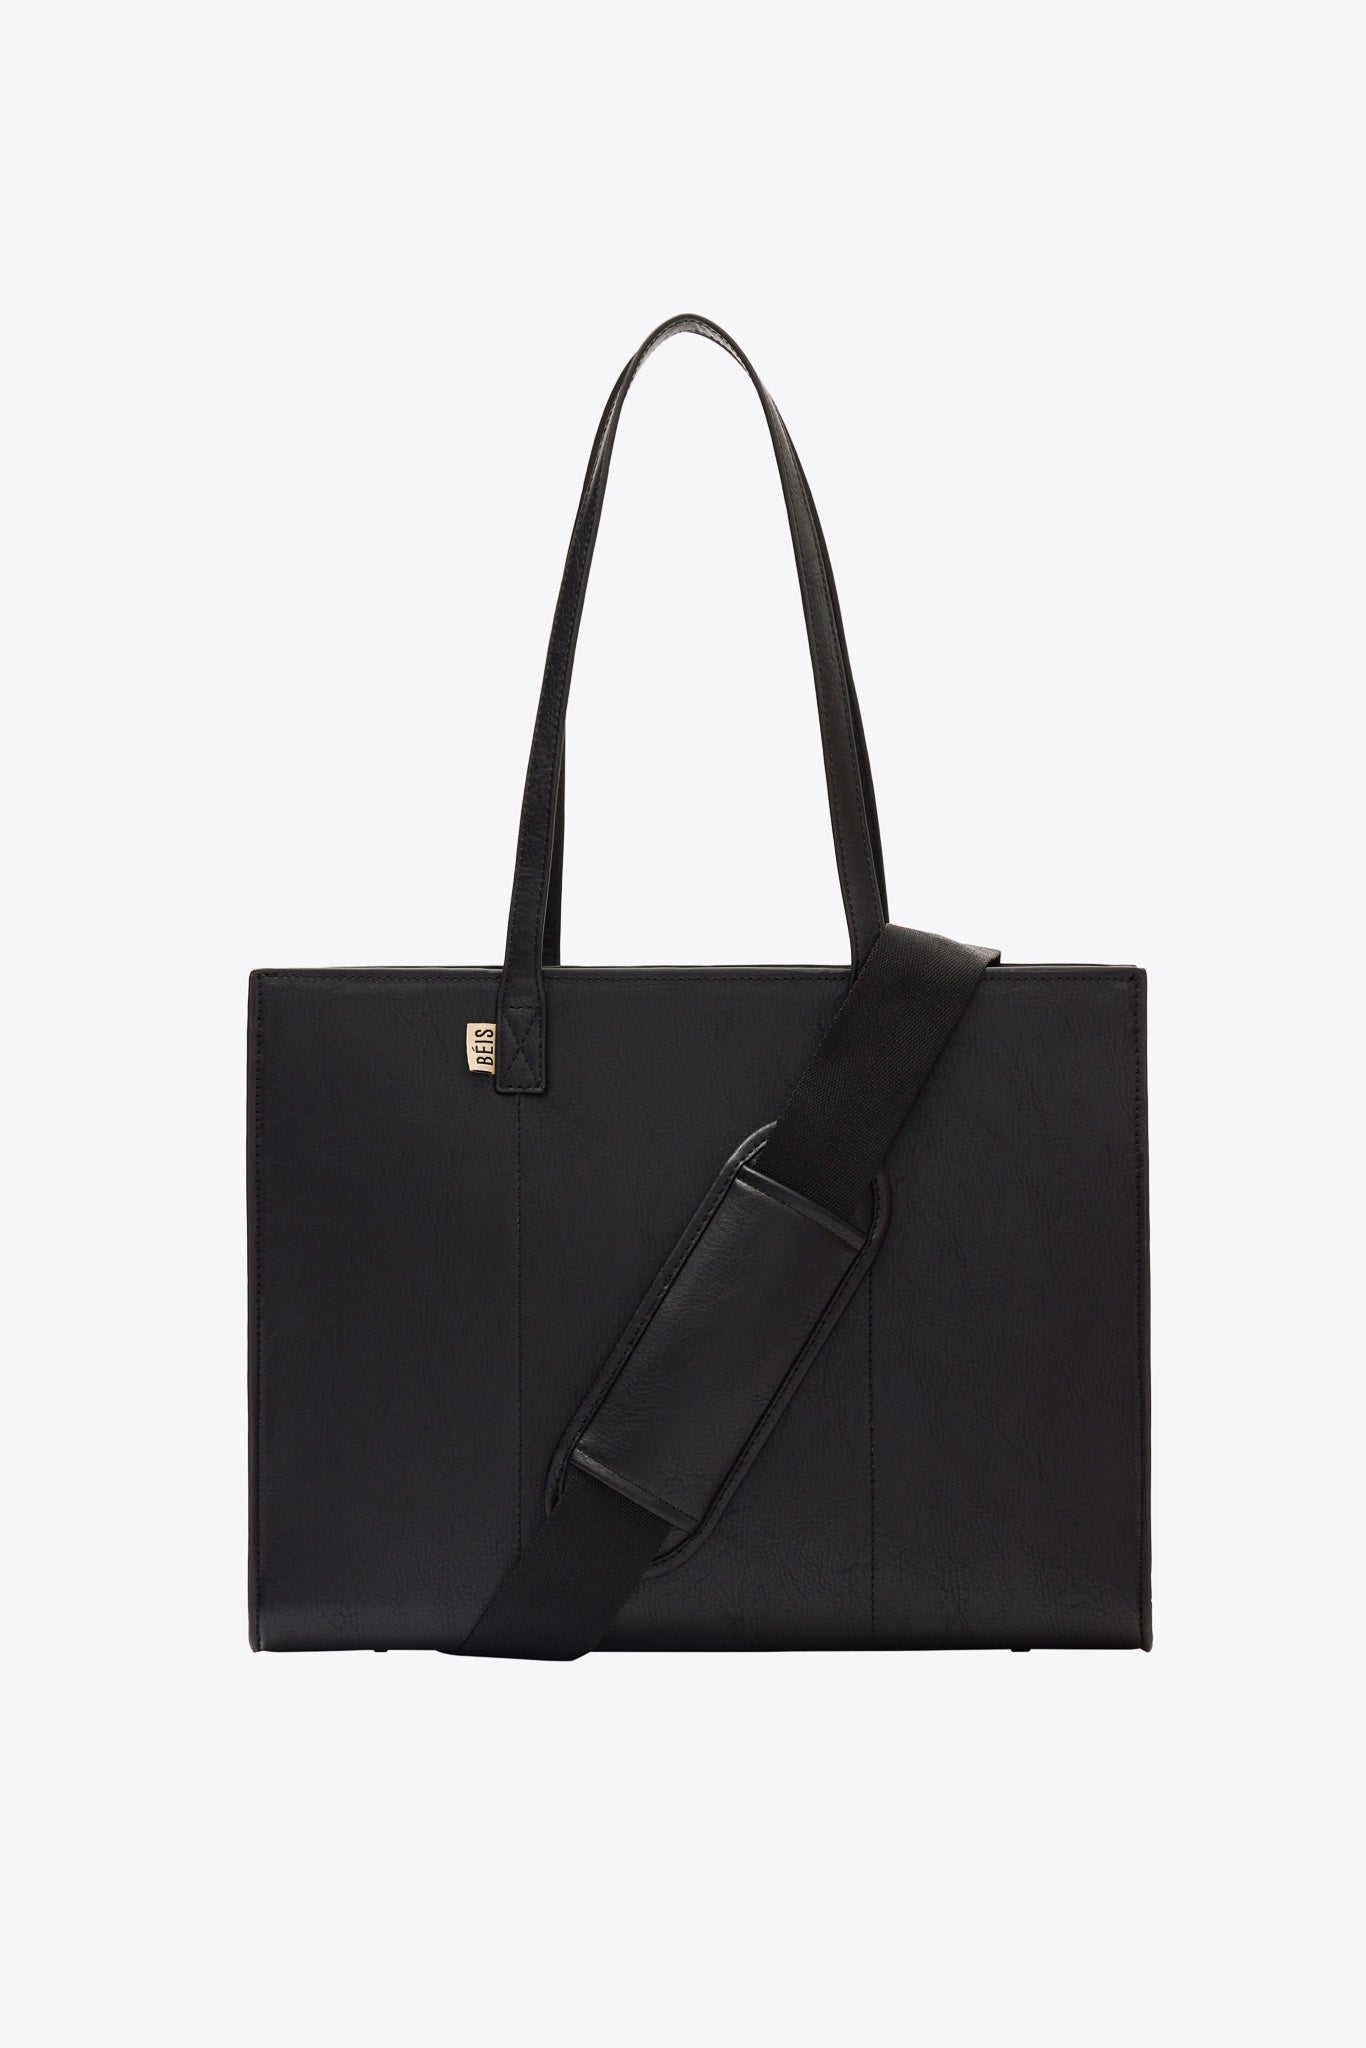 BÉIS 'The Work Tote' in Black - Work Bag For Women & Laptop Tote